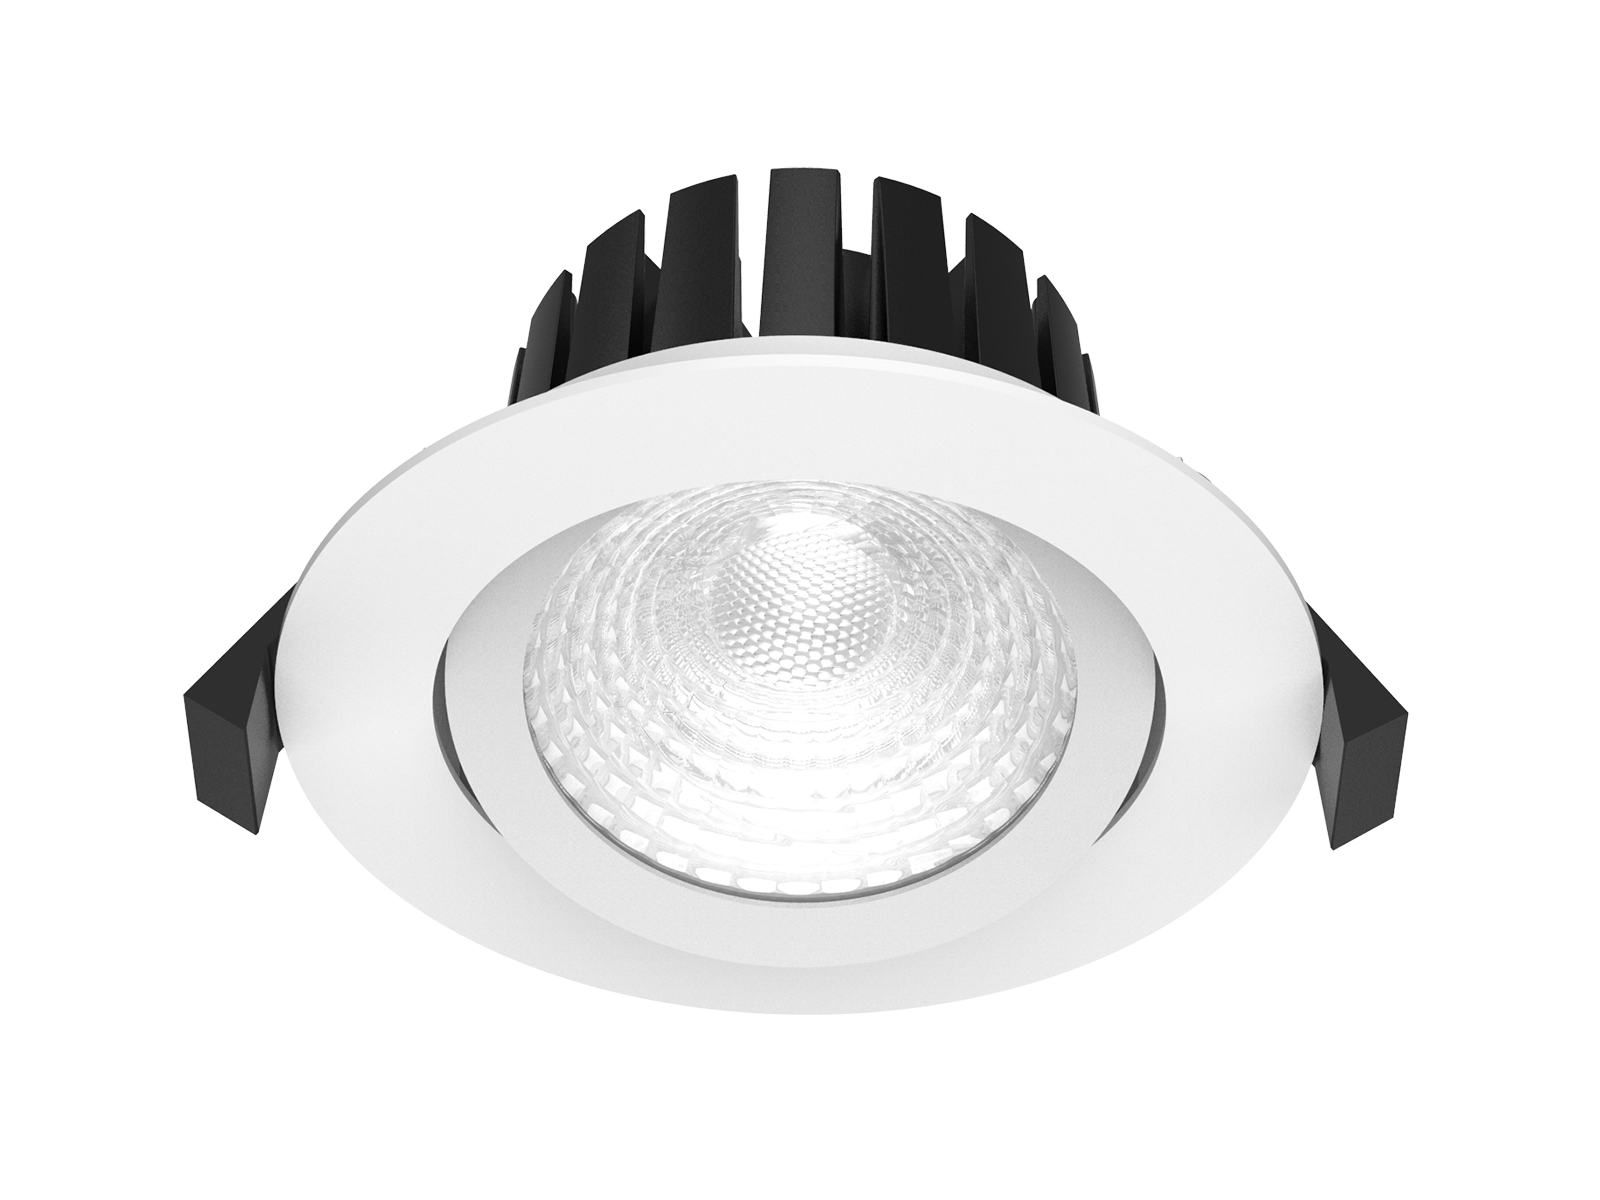 CL102 3 IP65 LED Downlight